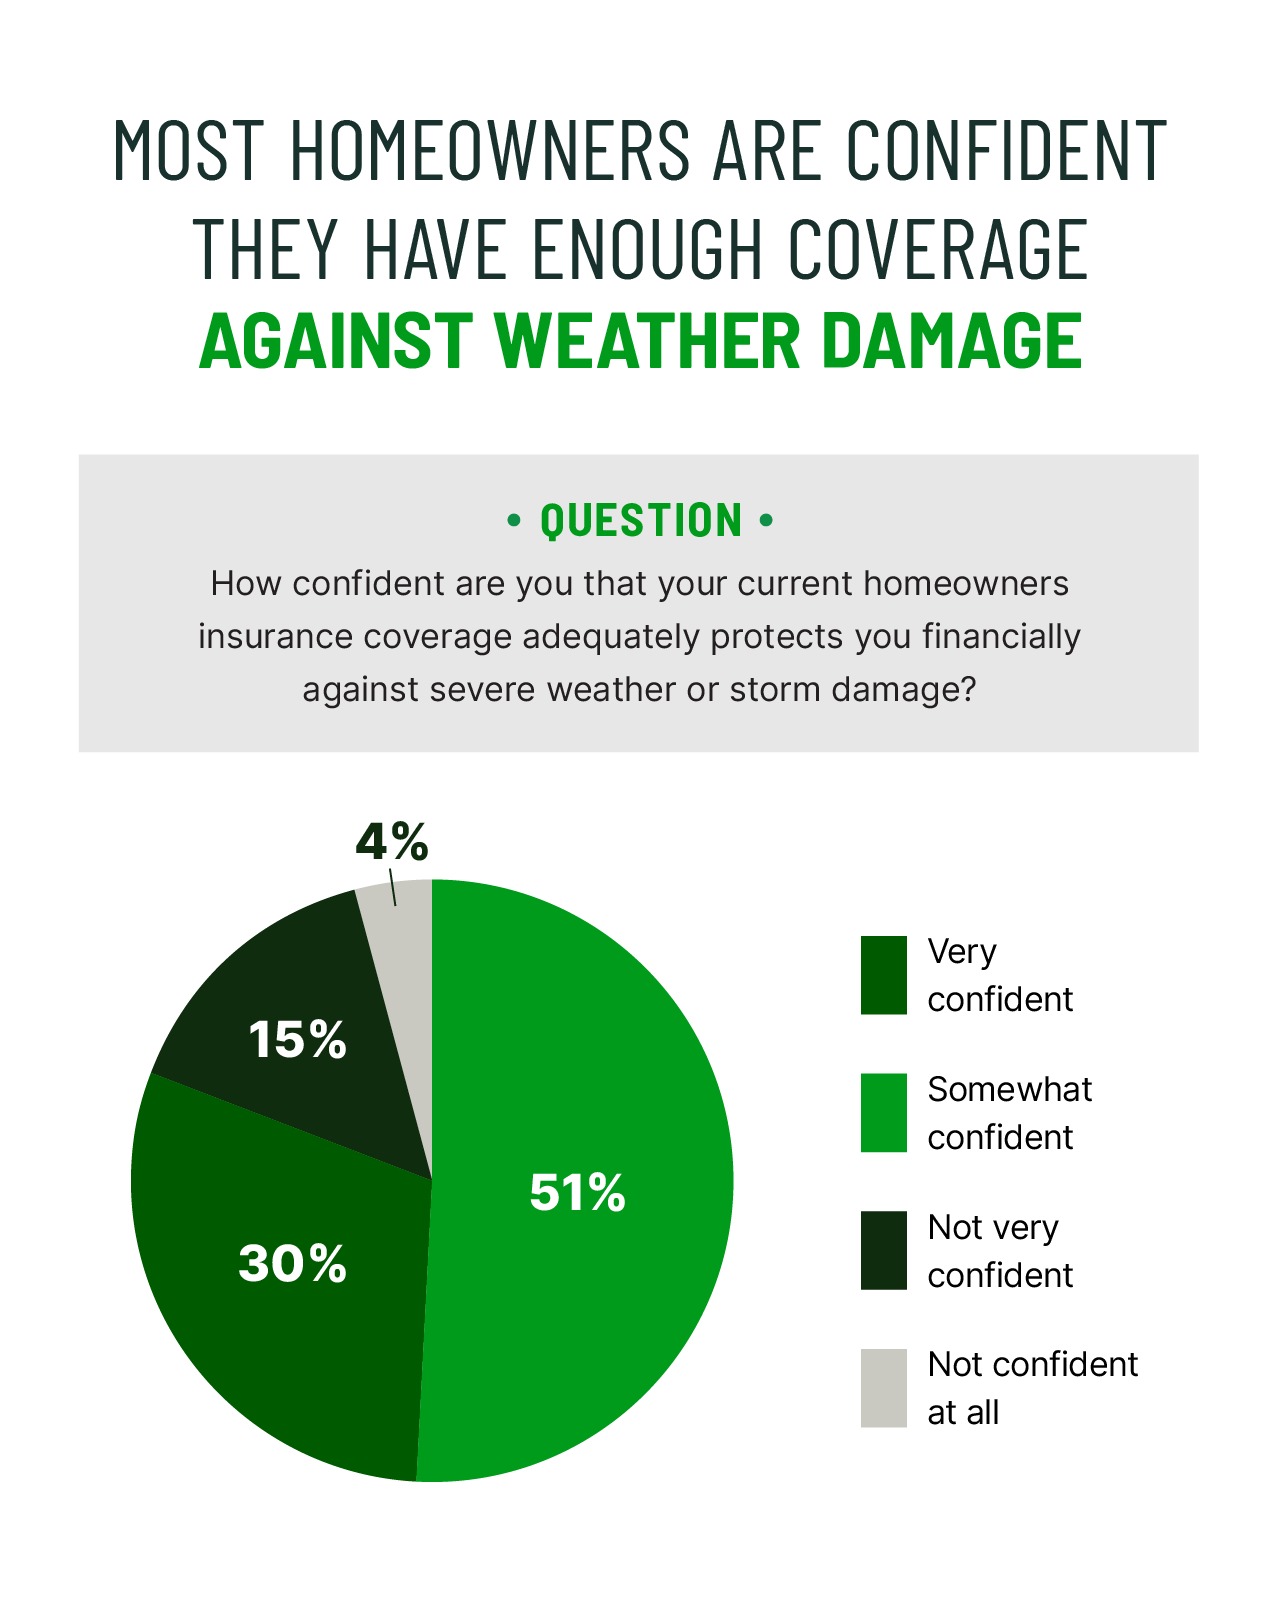 An illustrated pie chart shows what percentage of homeowners are confident that their home insurance adequately protects them financially from severe weather or storm damage. 